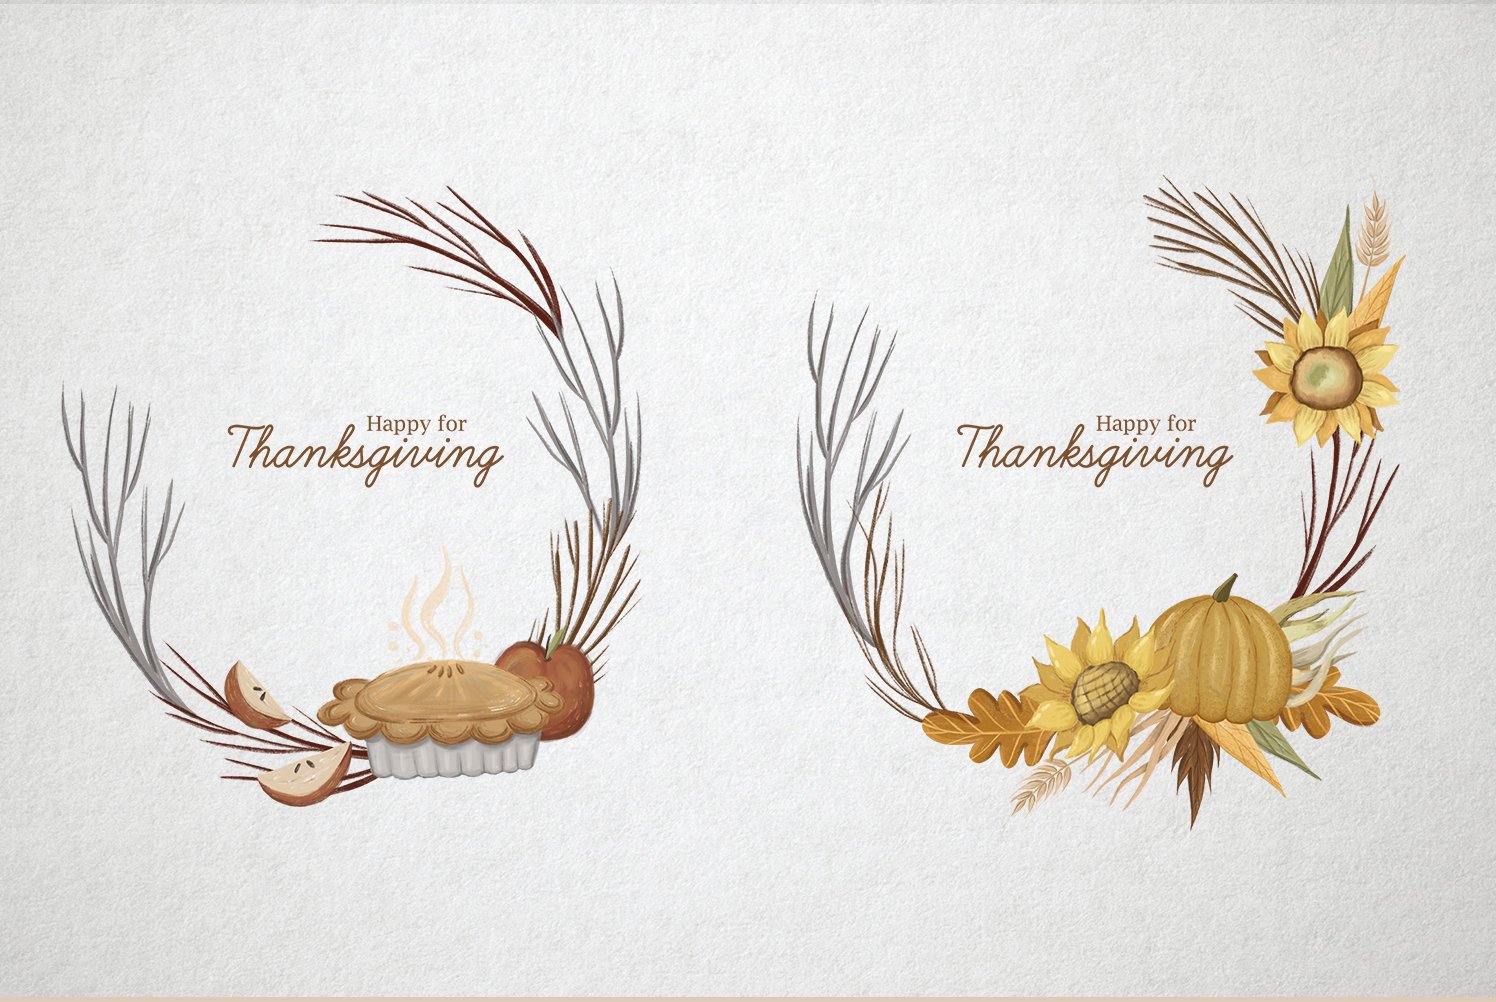 Two autumn wreathes in a minimalistic style.